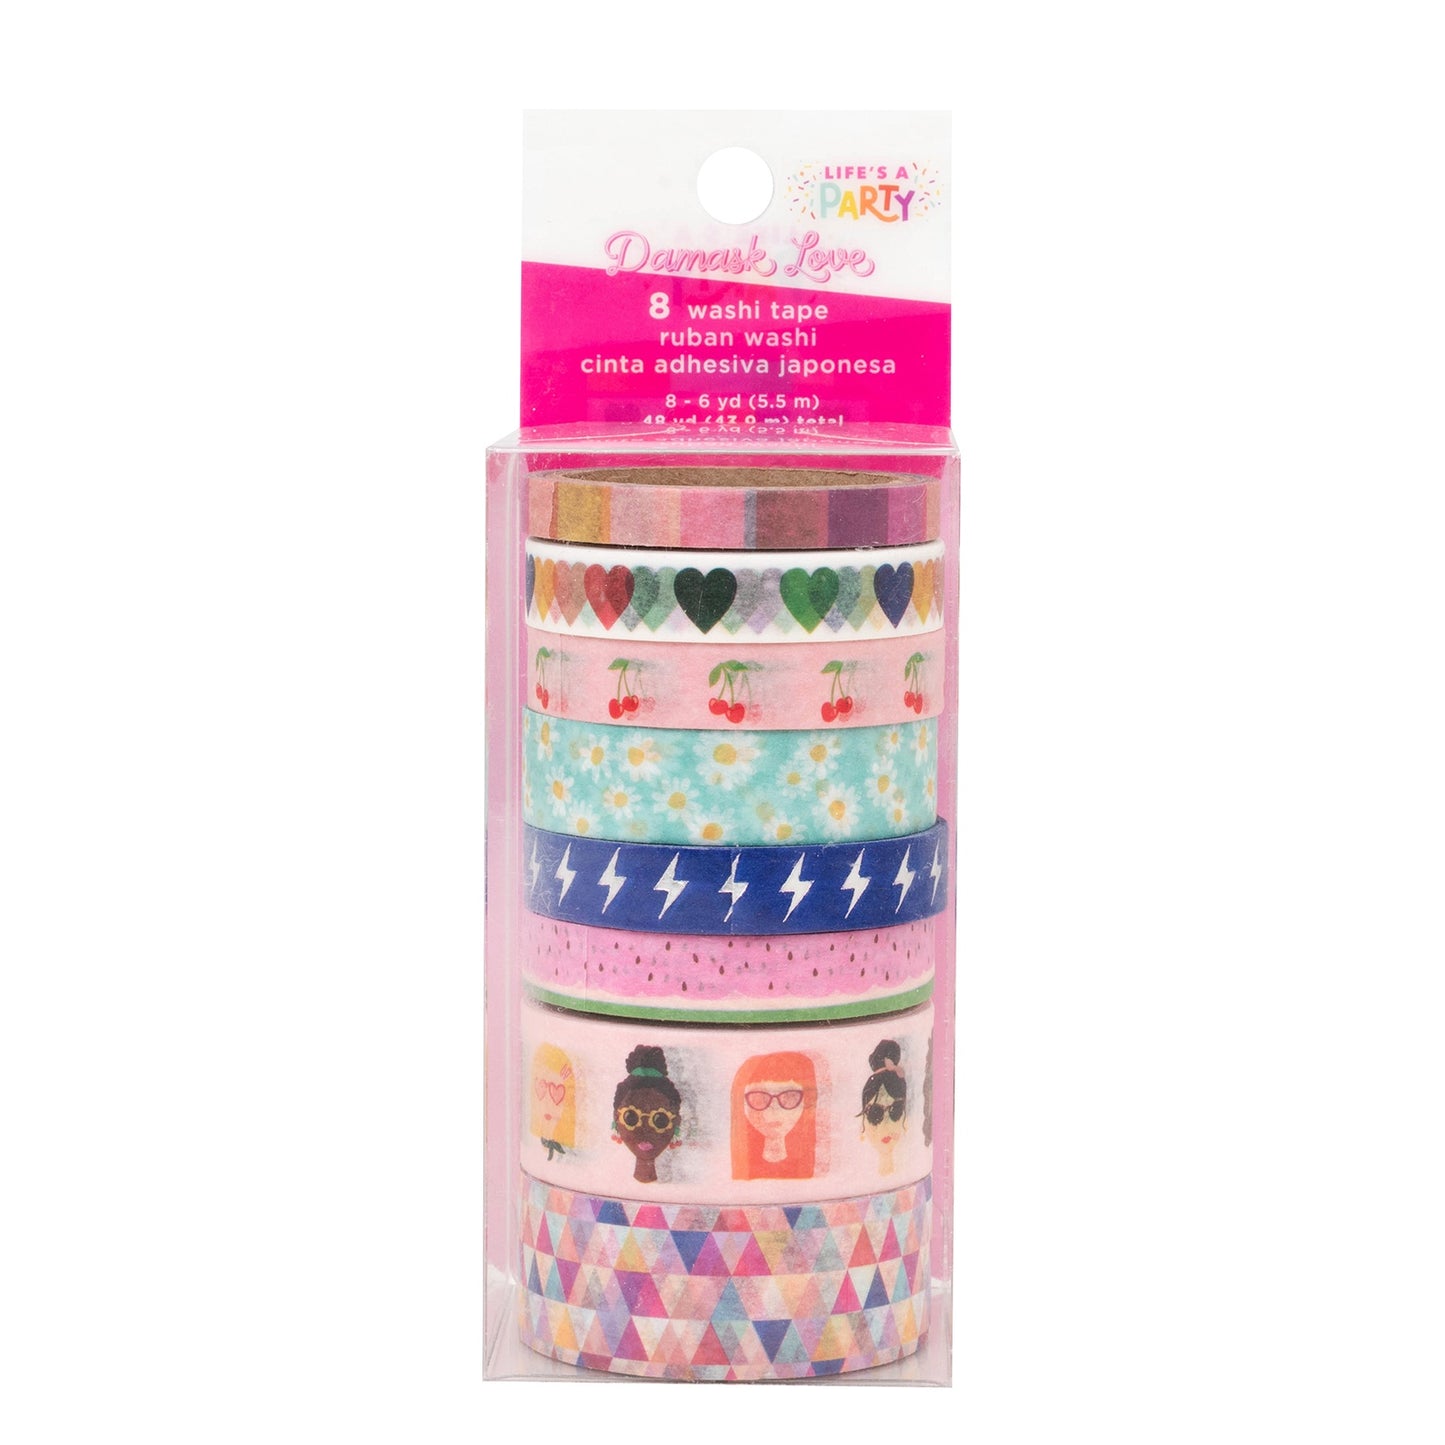 Damask Love Life's A Party Washi Tape 8/Pkg